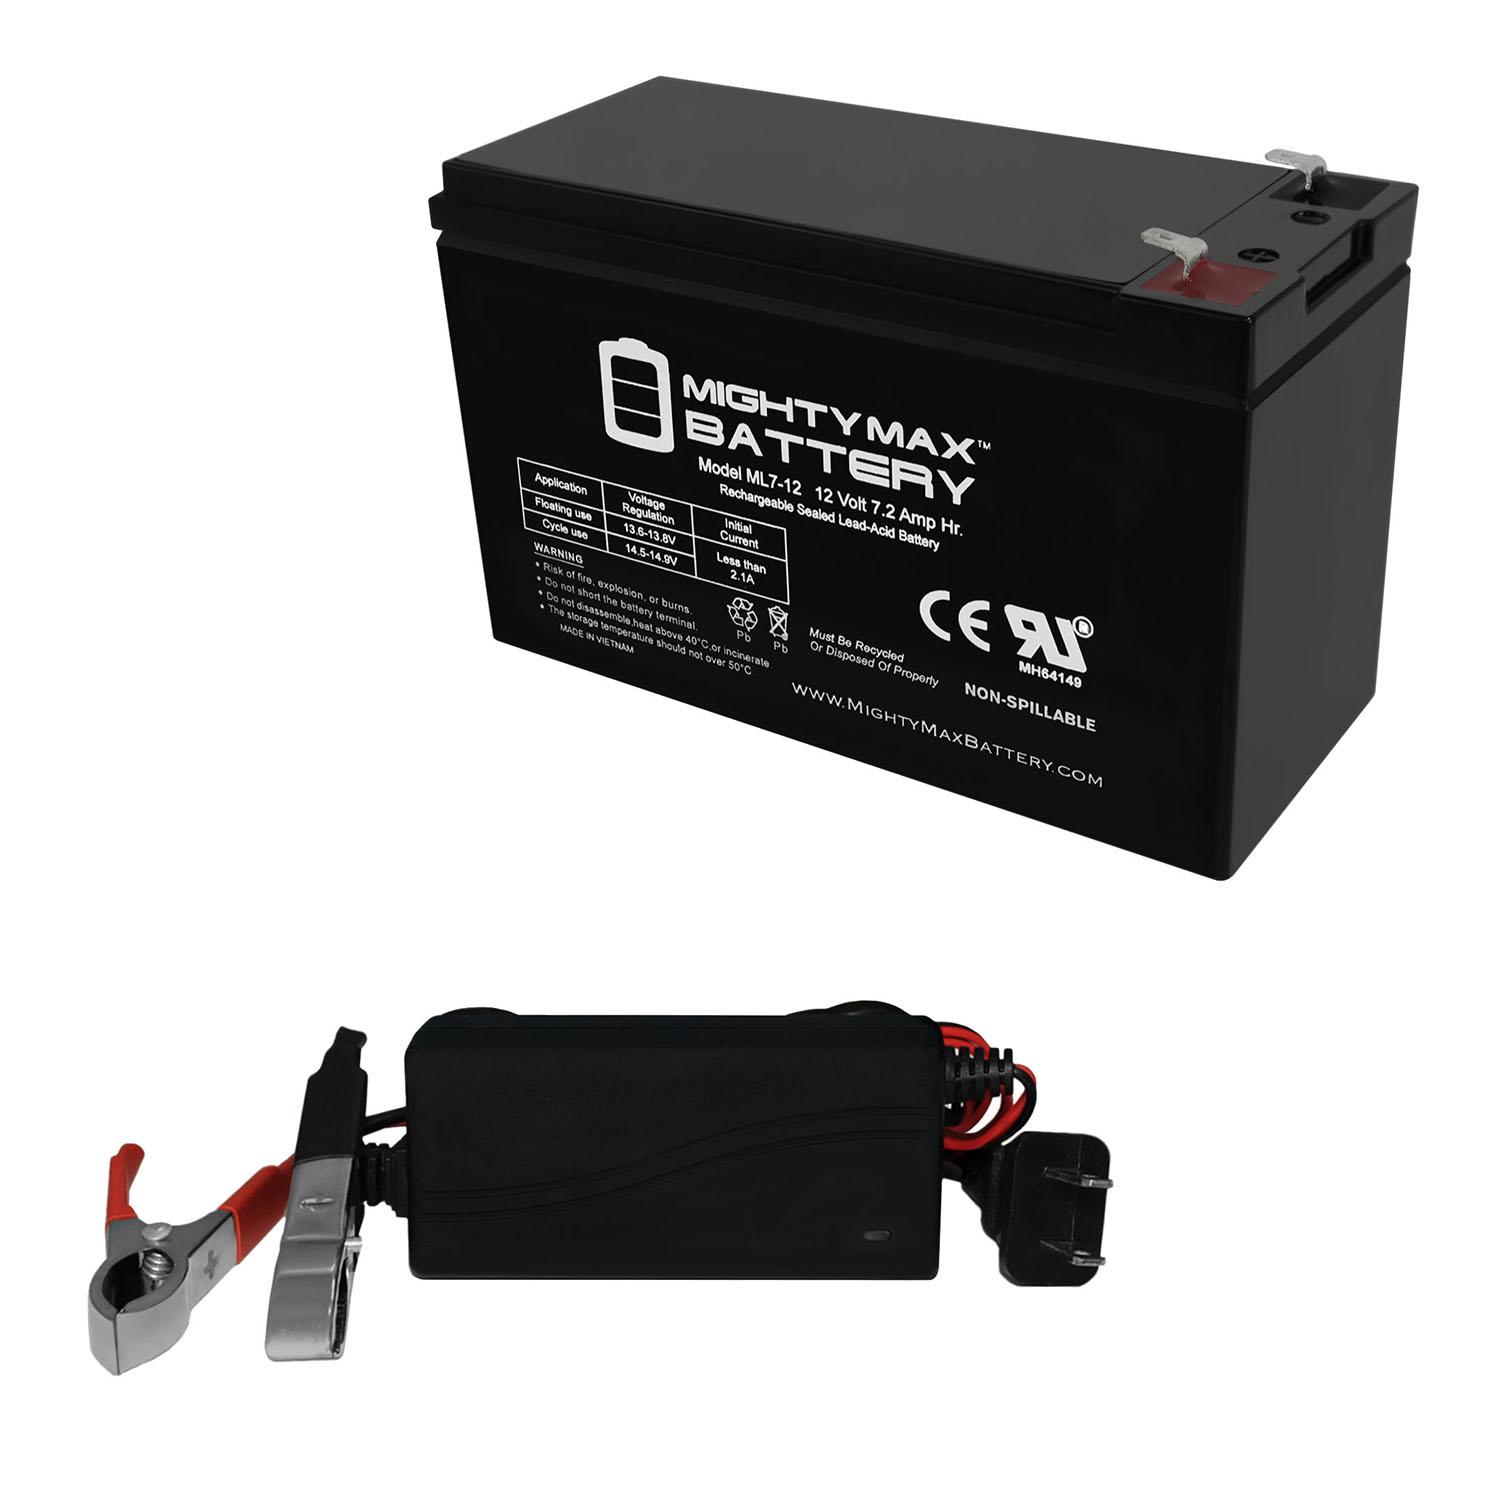 Mighty Max Battery 12V 7.2AH Compatible Battery For APC Power System + 12V 1 Amp Charger